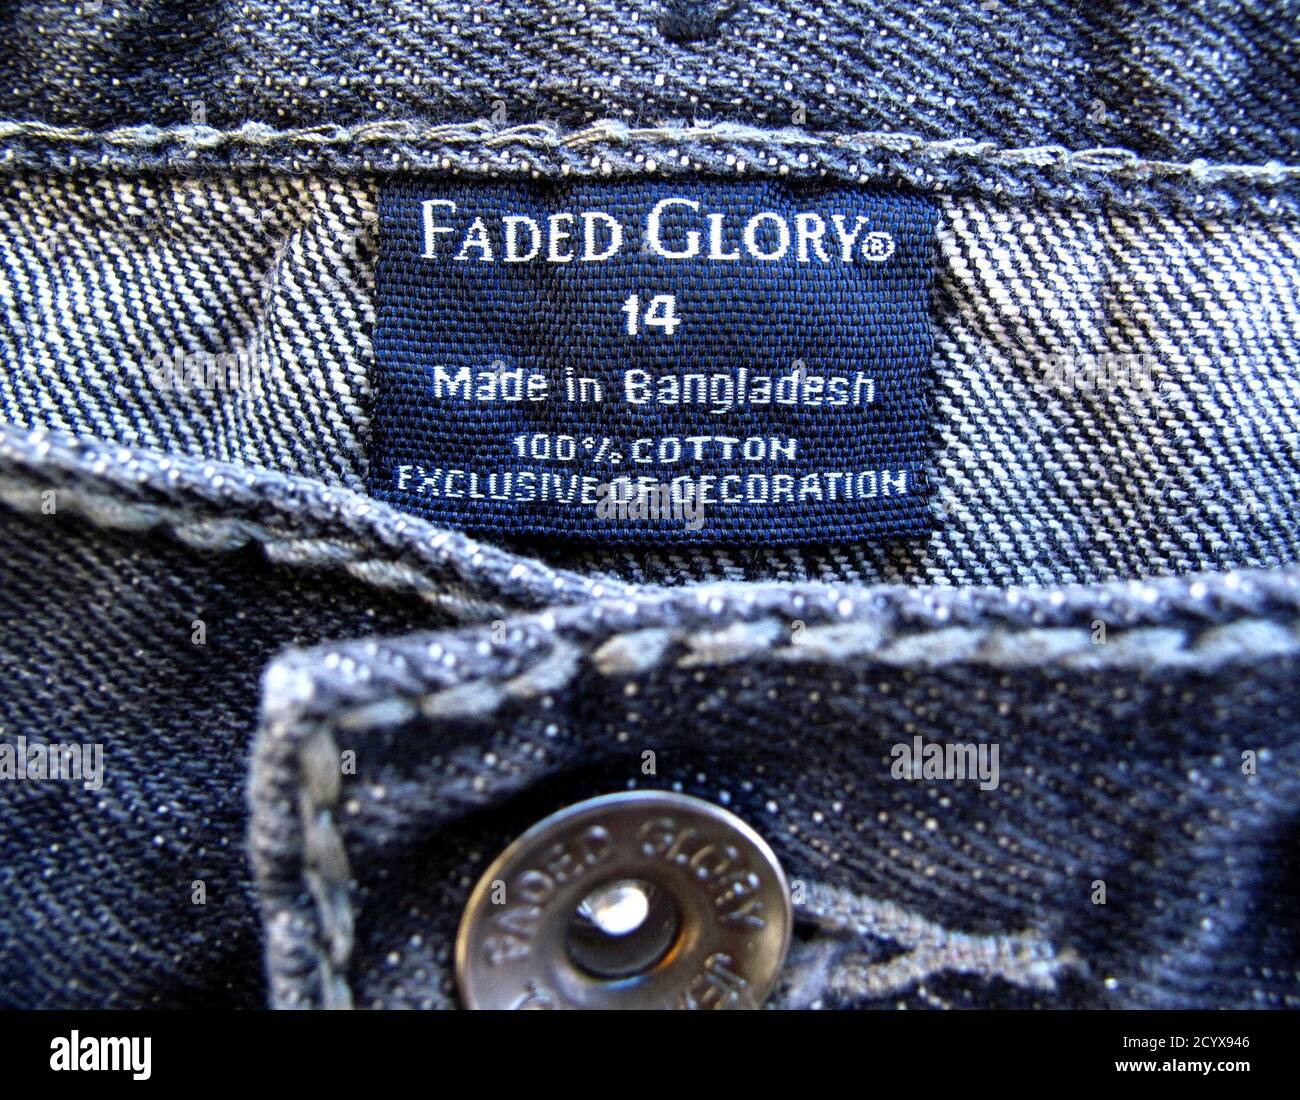 The clothing tag on a pair of jeans by Wal-Mart's brand Faded Glory, which  is made in Bangladesh, is shown after purchase from a Walmart store in  Encinitas, California, May 14, 2013.